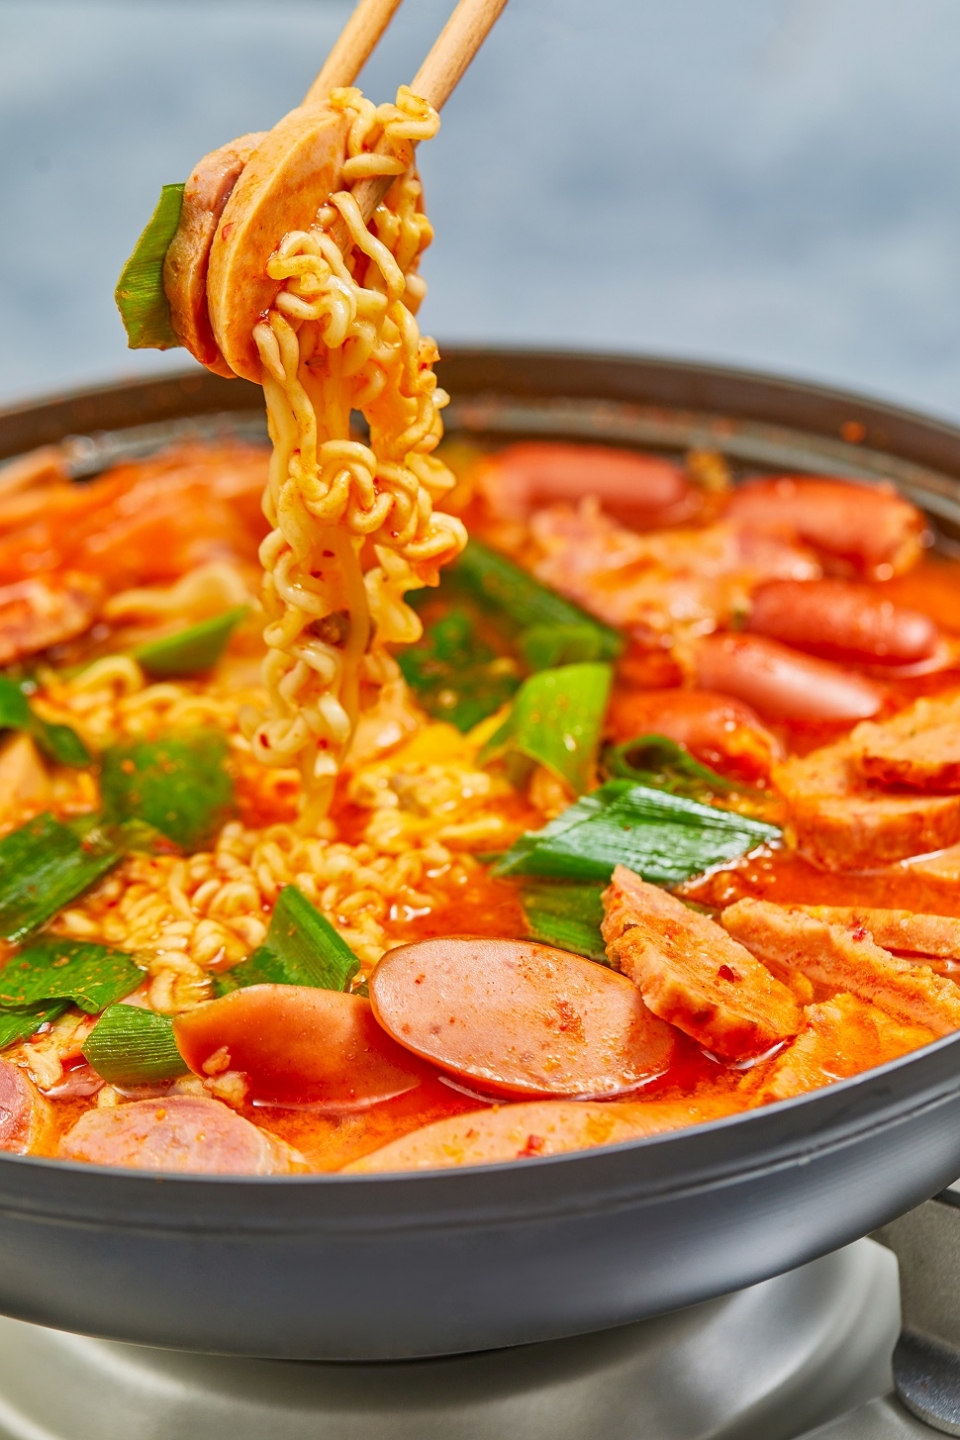 Budaejjigae combines foreign-based ingredients like ham and sausage to a traditional Korean stew that includes red pepper powder and kimchi. (Courtesy of gettyimagesbank)